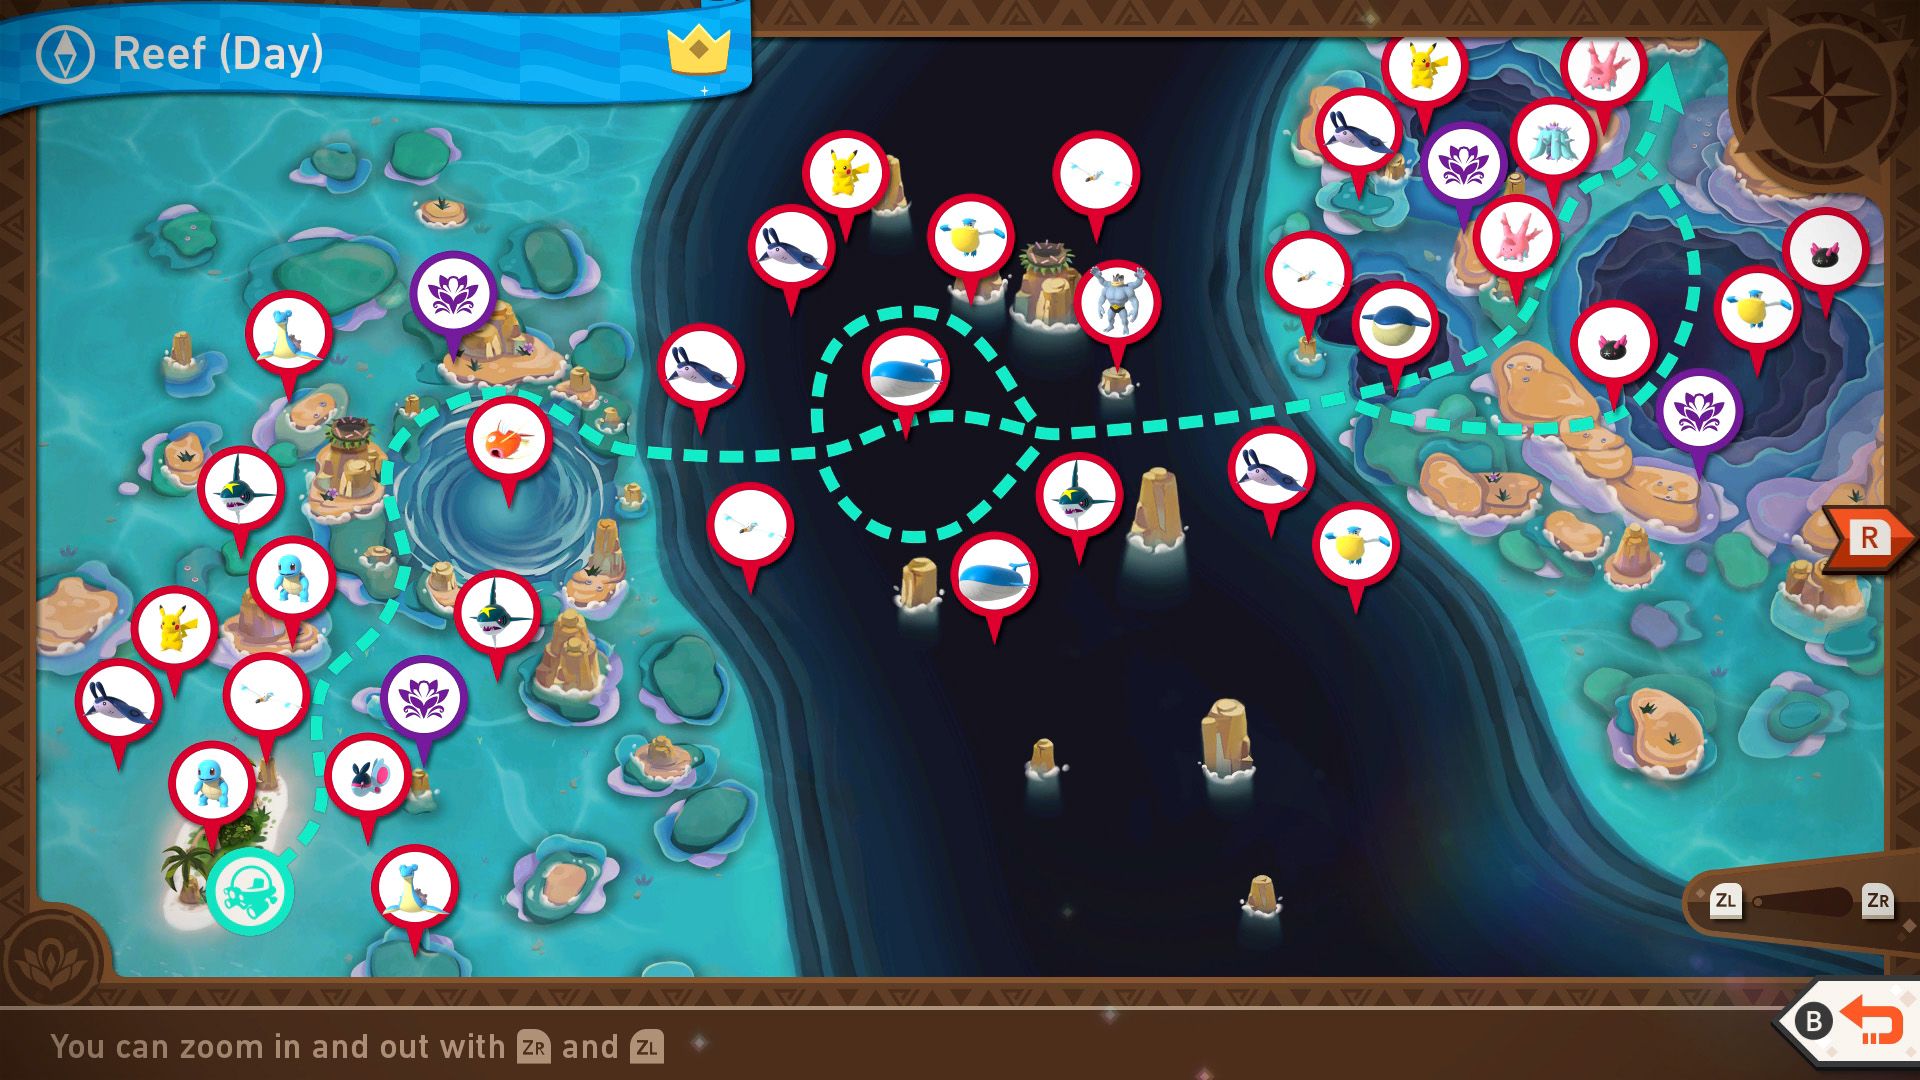 A complete map of the Maricopia Reef (Day) course in New Pokemon Snap